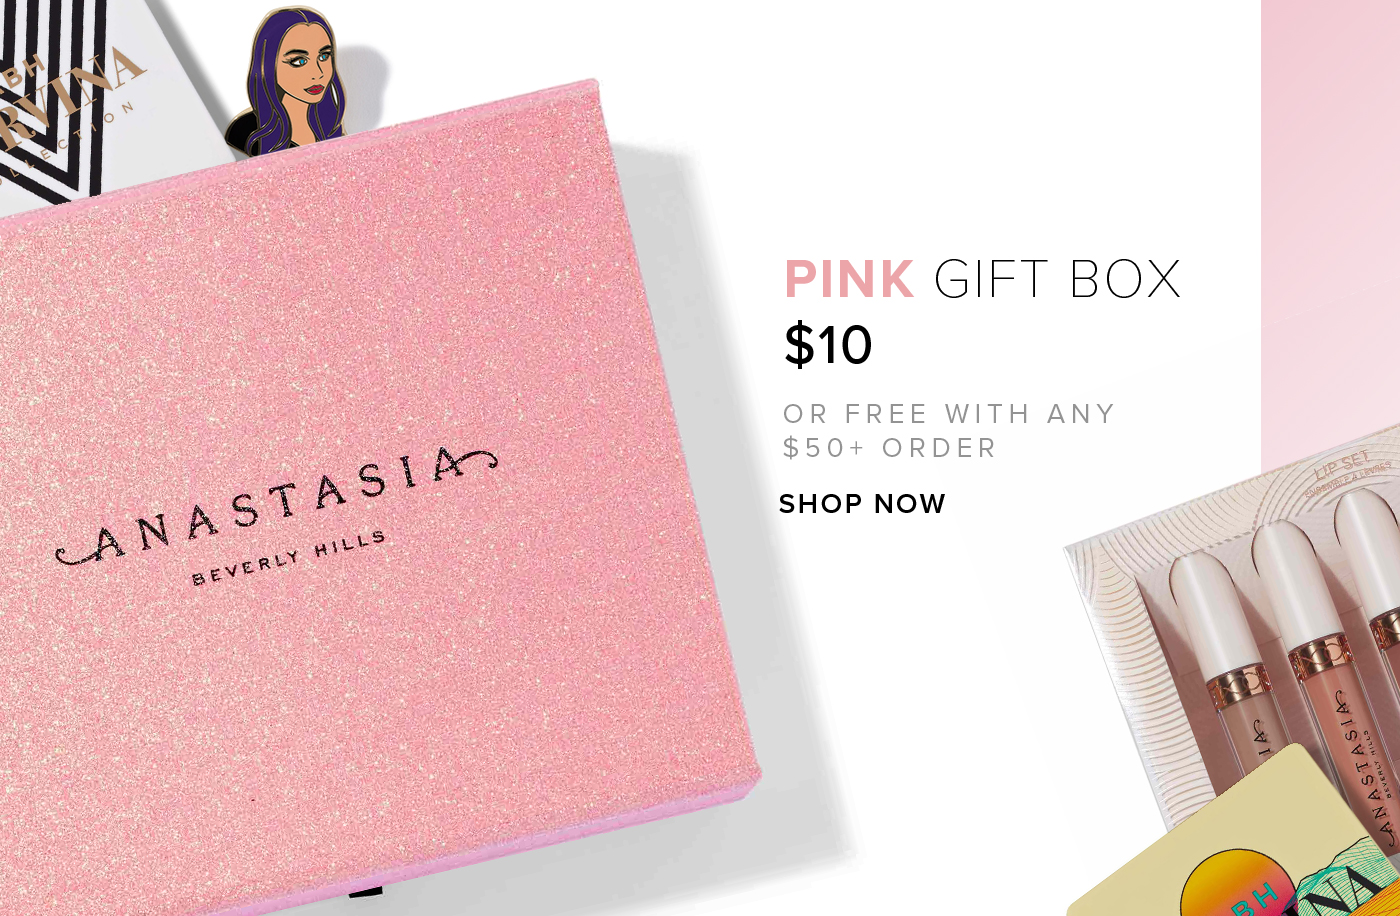 PINK GIFT BOX $10. SHOP NOW